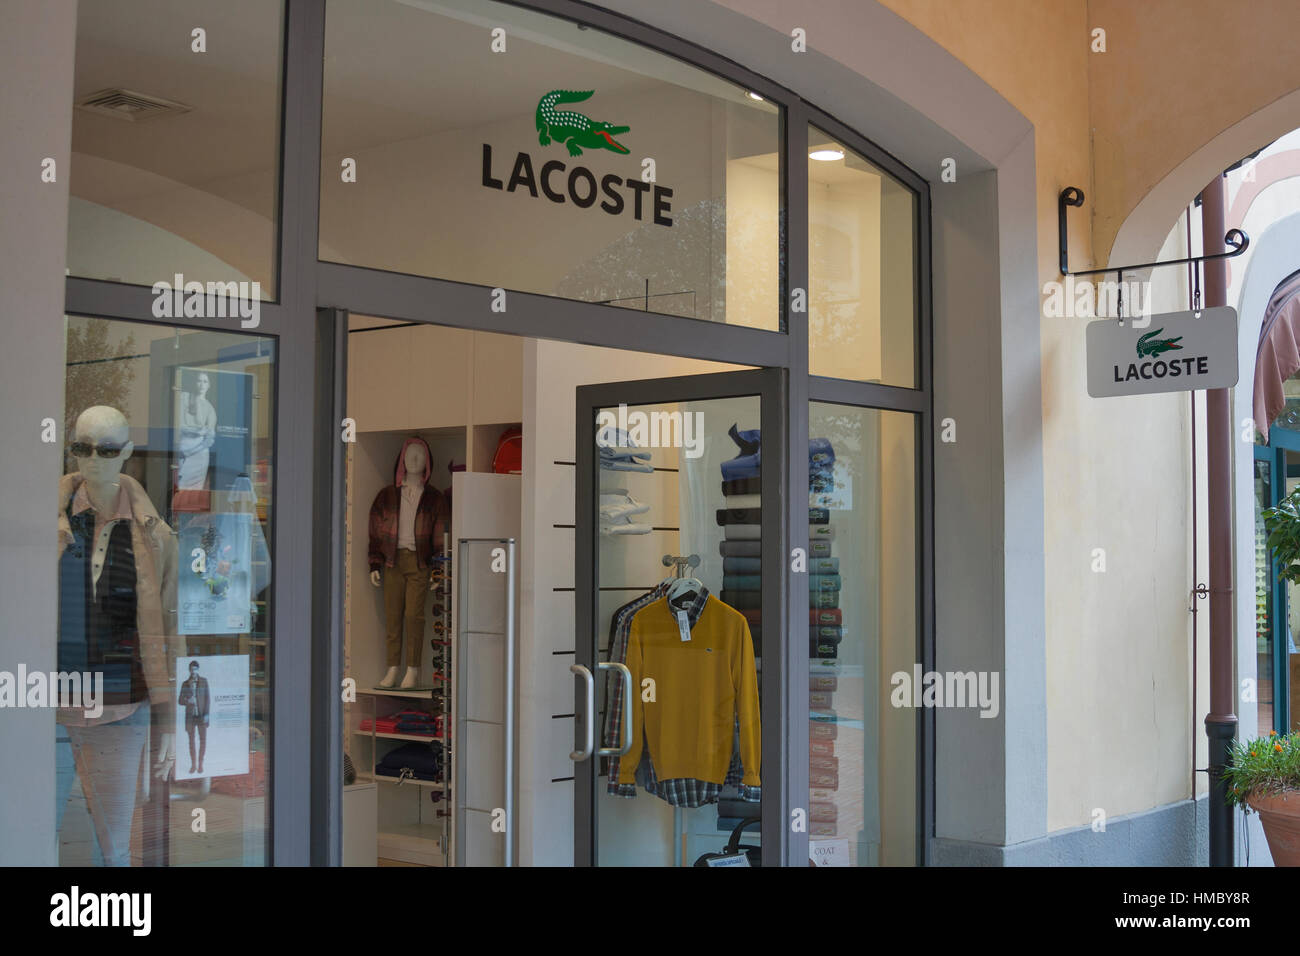 Lacoste store in Stock Photo 